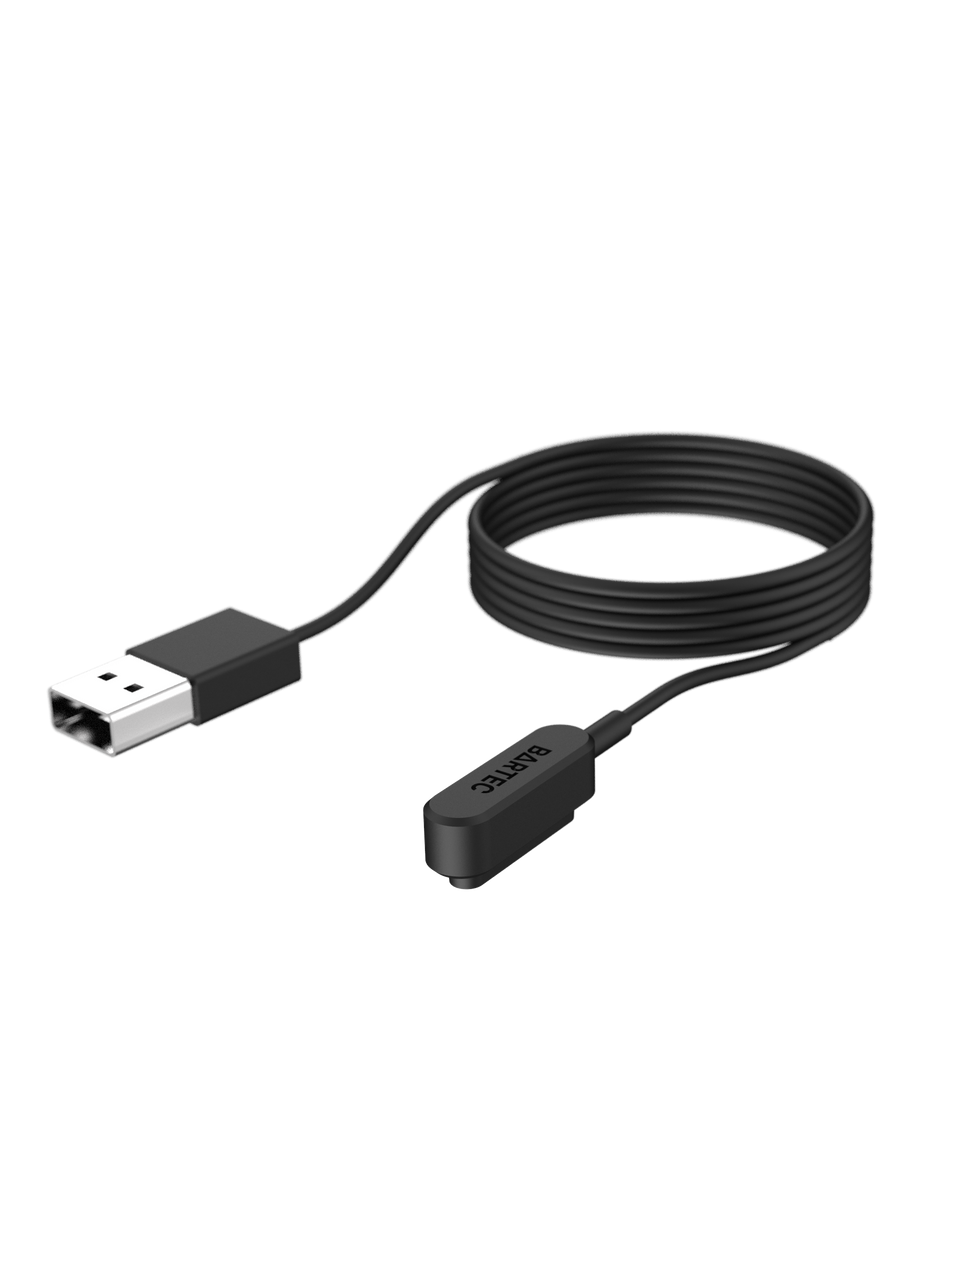 What is a Type 2 charging cable? - AG Electrical Technology Co., Ltd